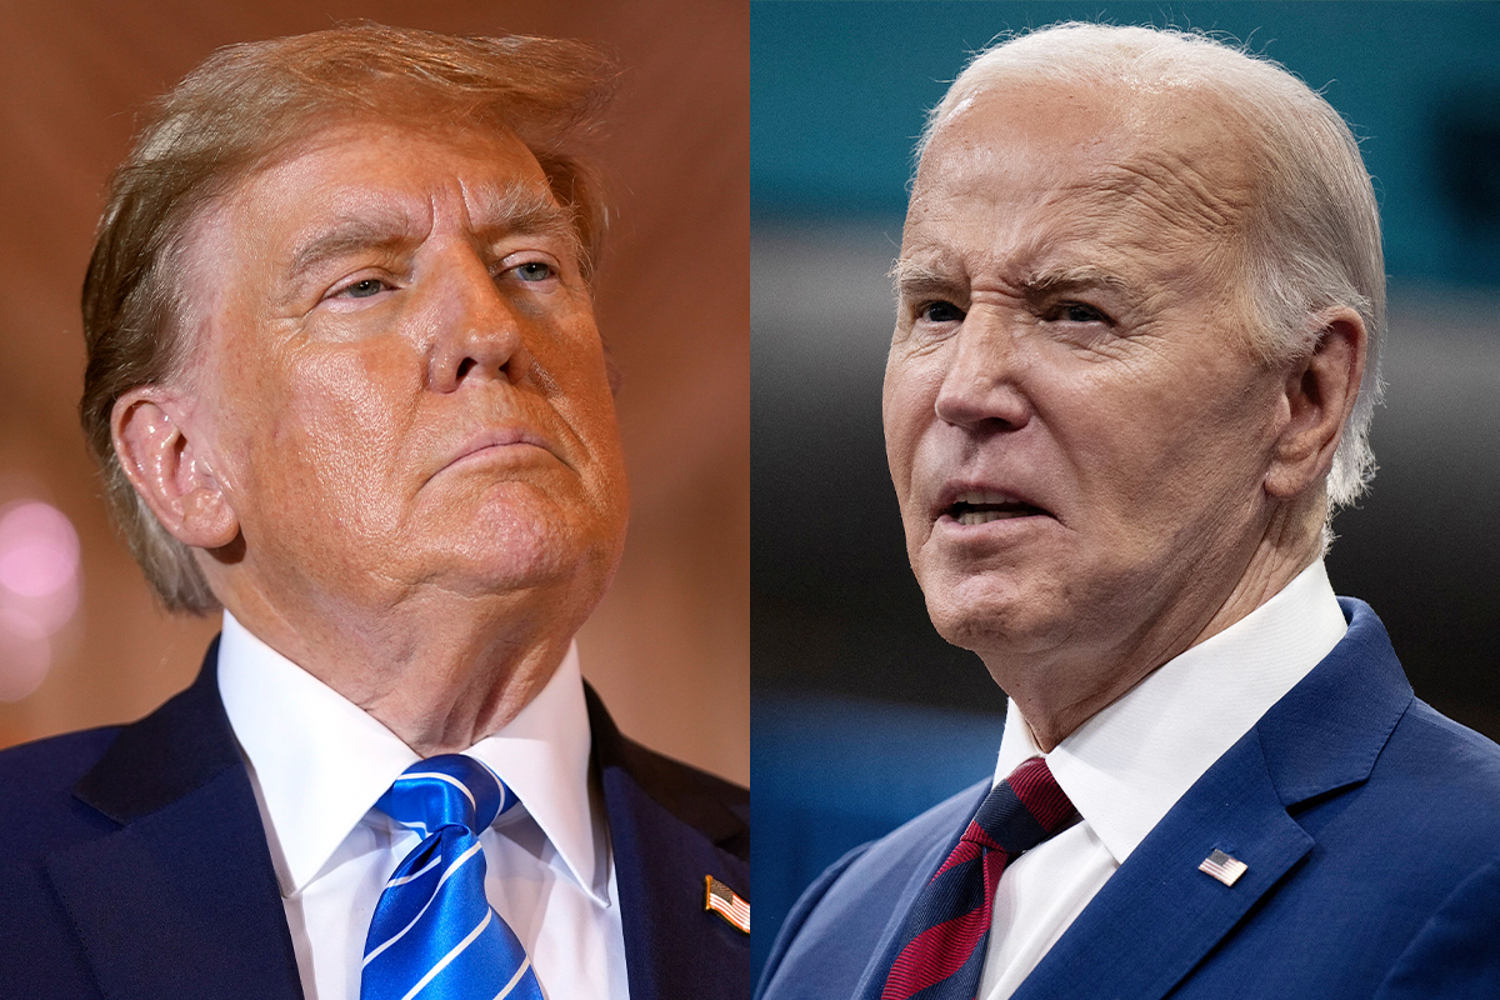 'Obamacare' wars heat up in 2024 race as Biden and Trump clash over subsidies